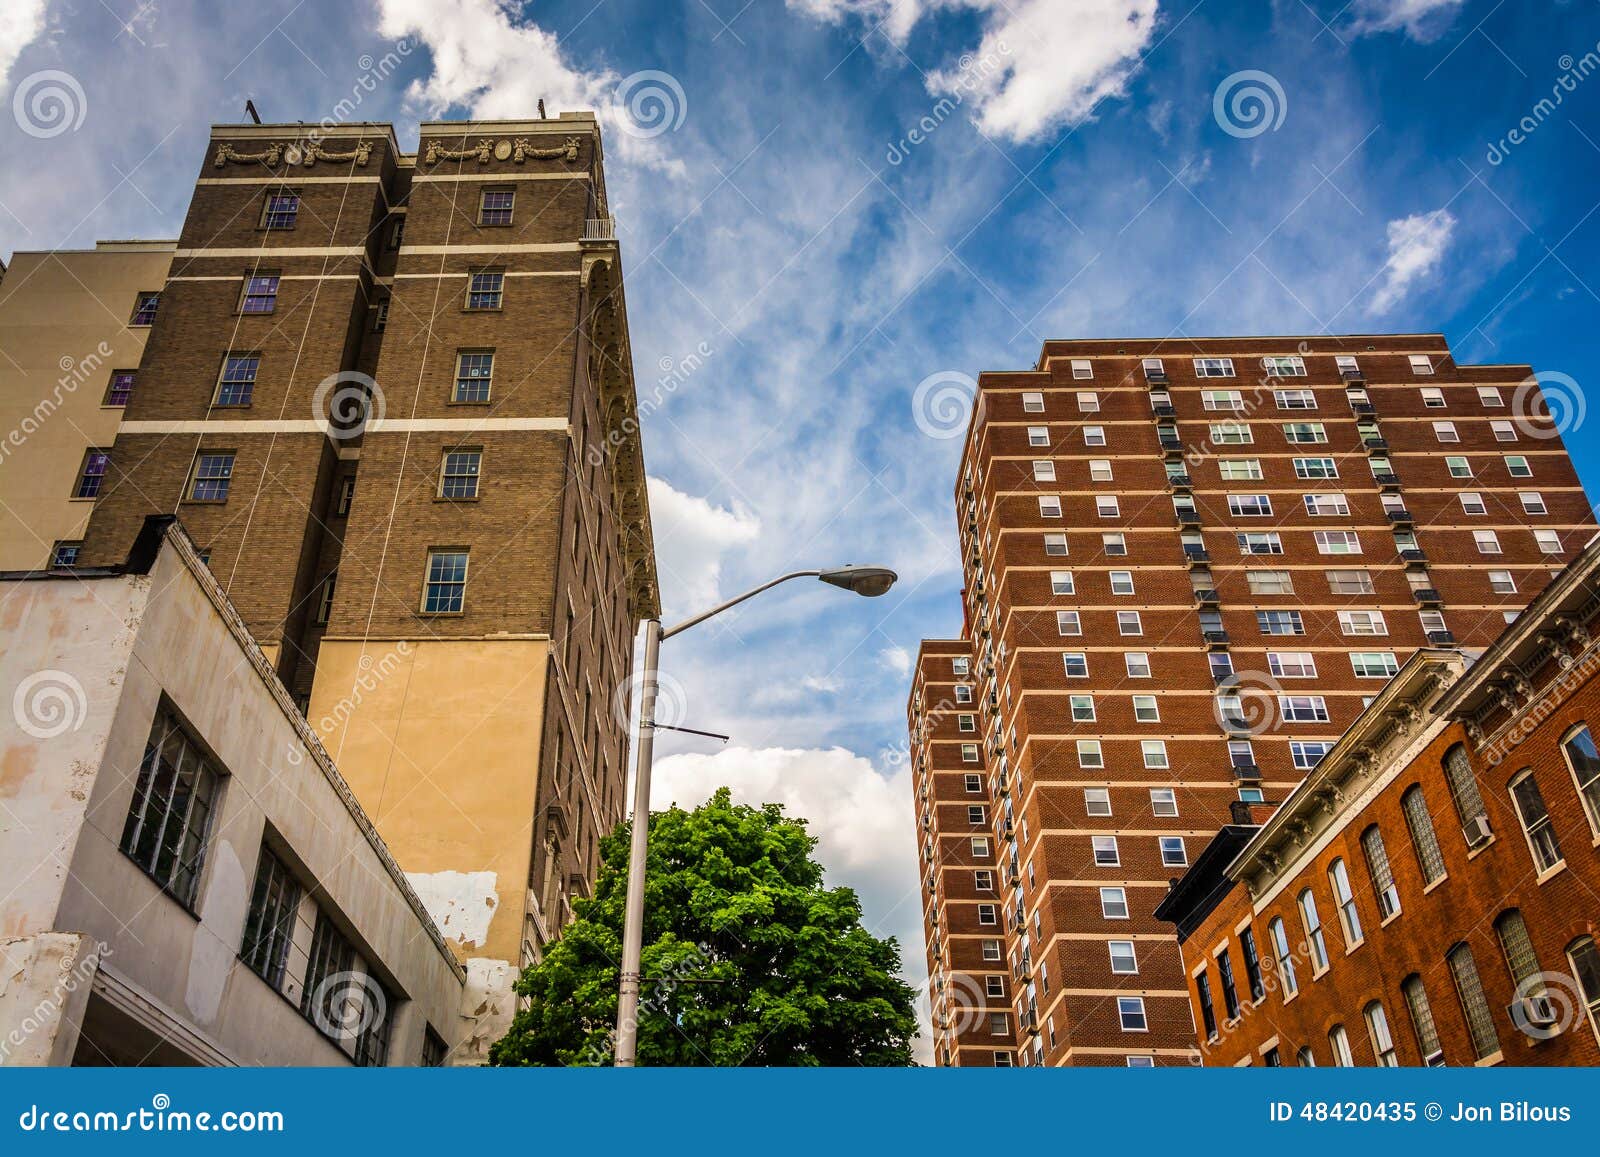 highrises in baltimore, maryland.